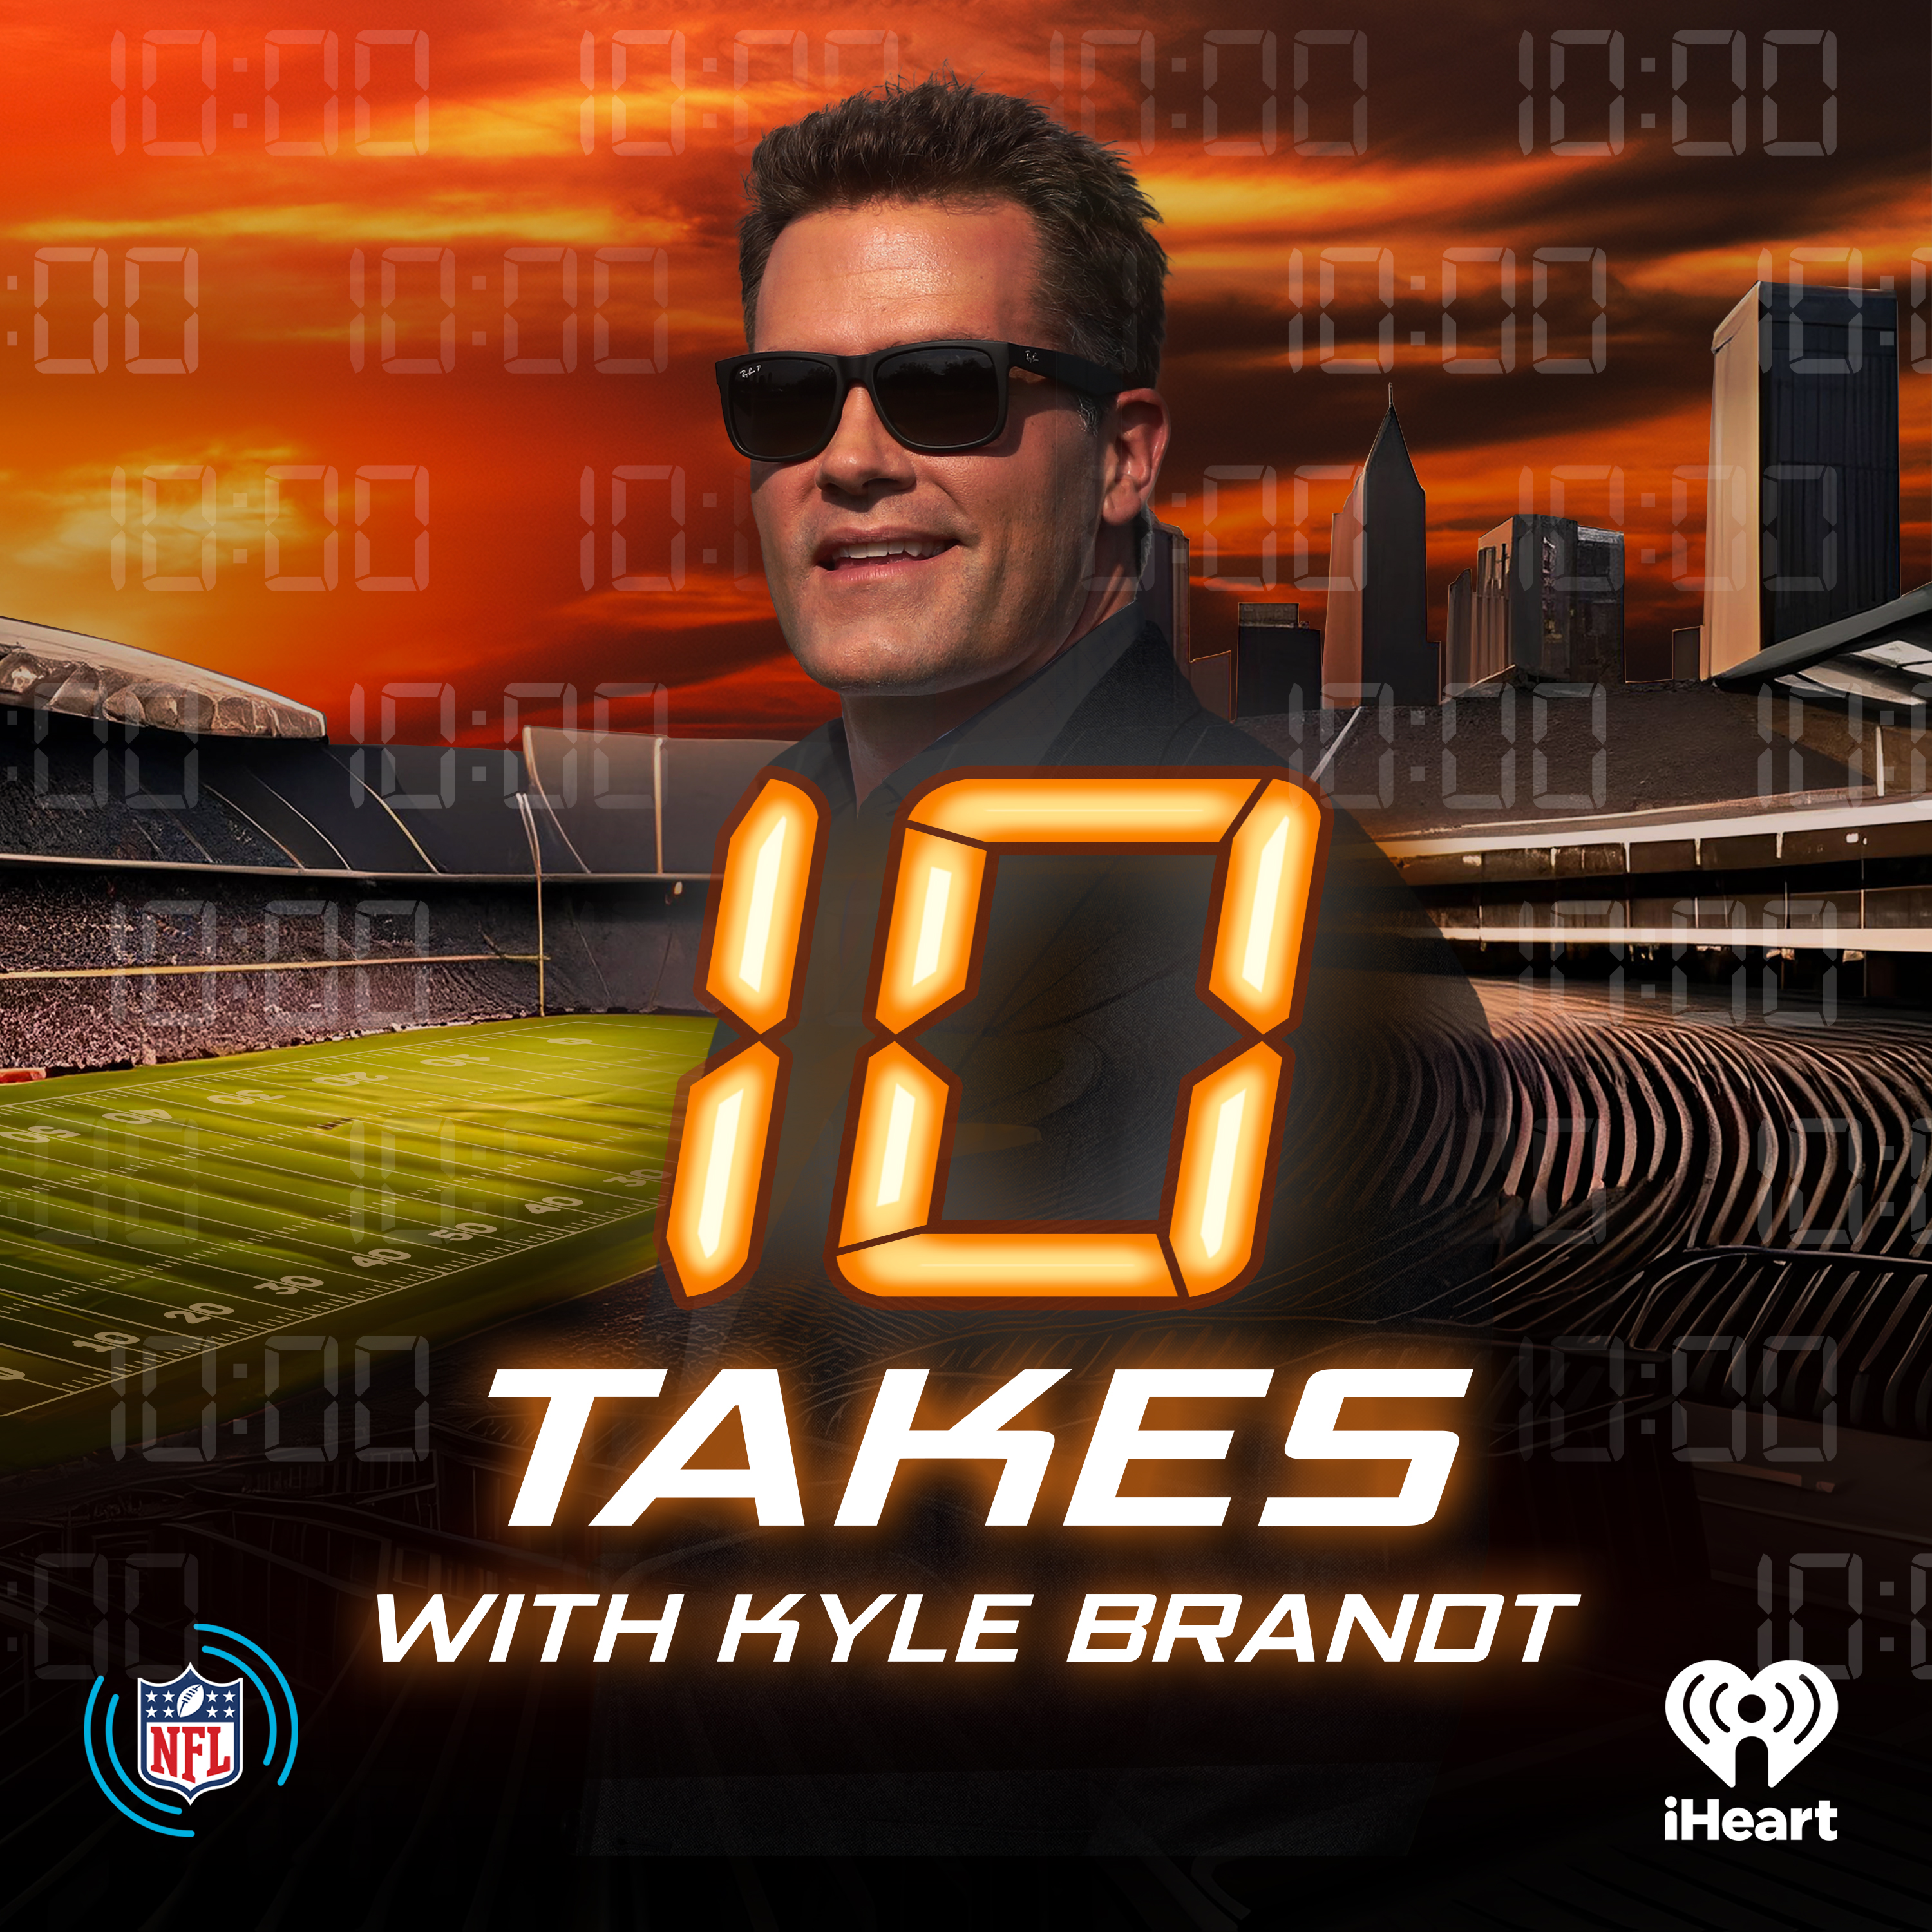 10 Takes with Kyle Brandt: The First 10 Minutes